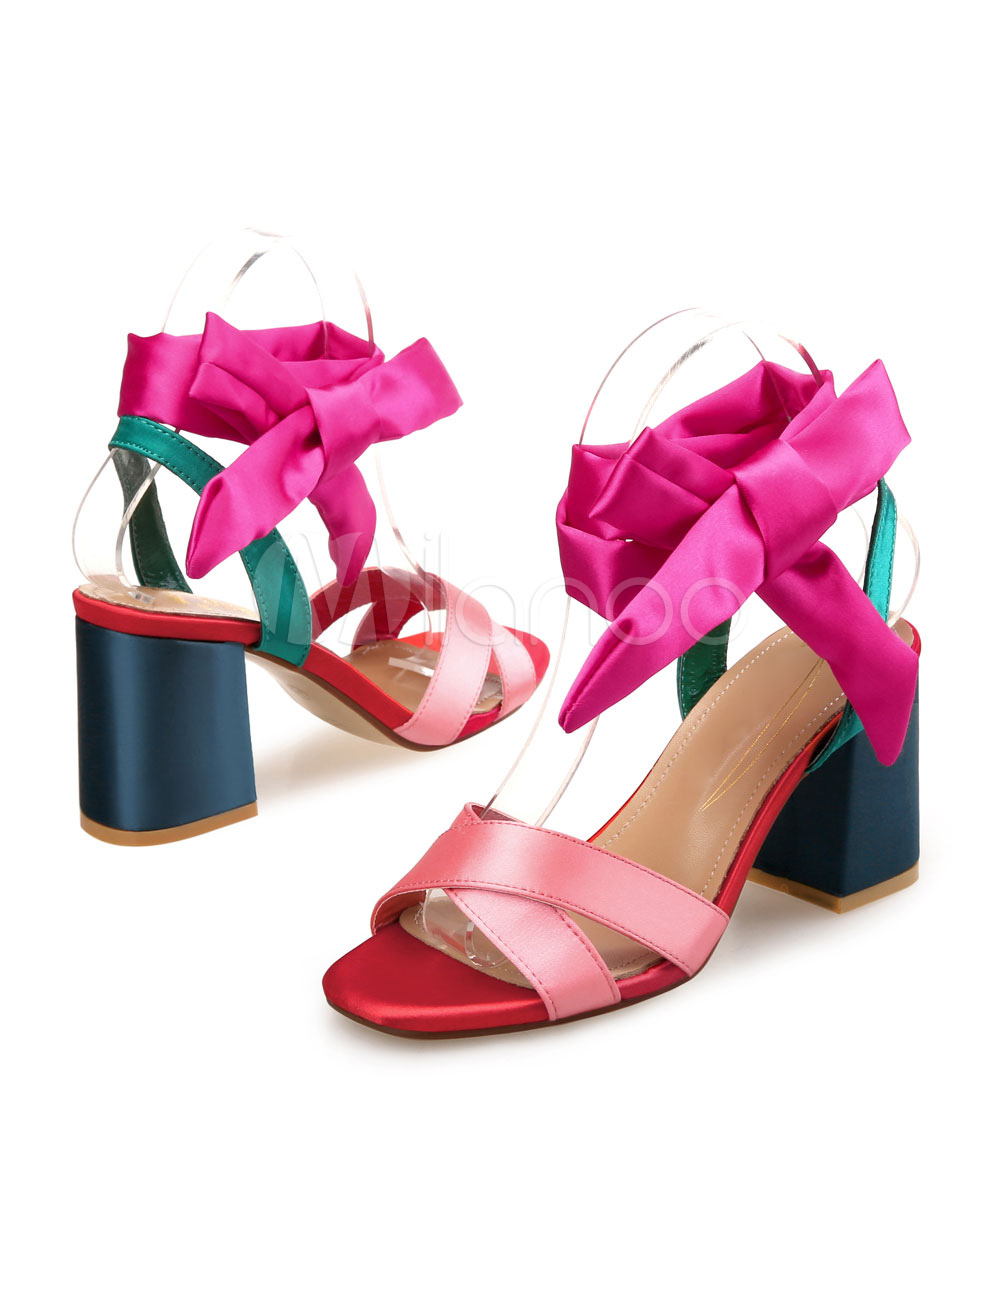 Satin High Heel Sandals Open Toe Ankle Strap Chunky Heel Sandal Shoes ...